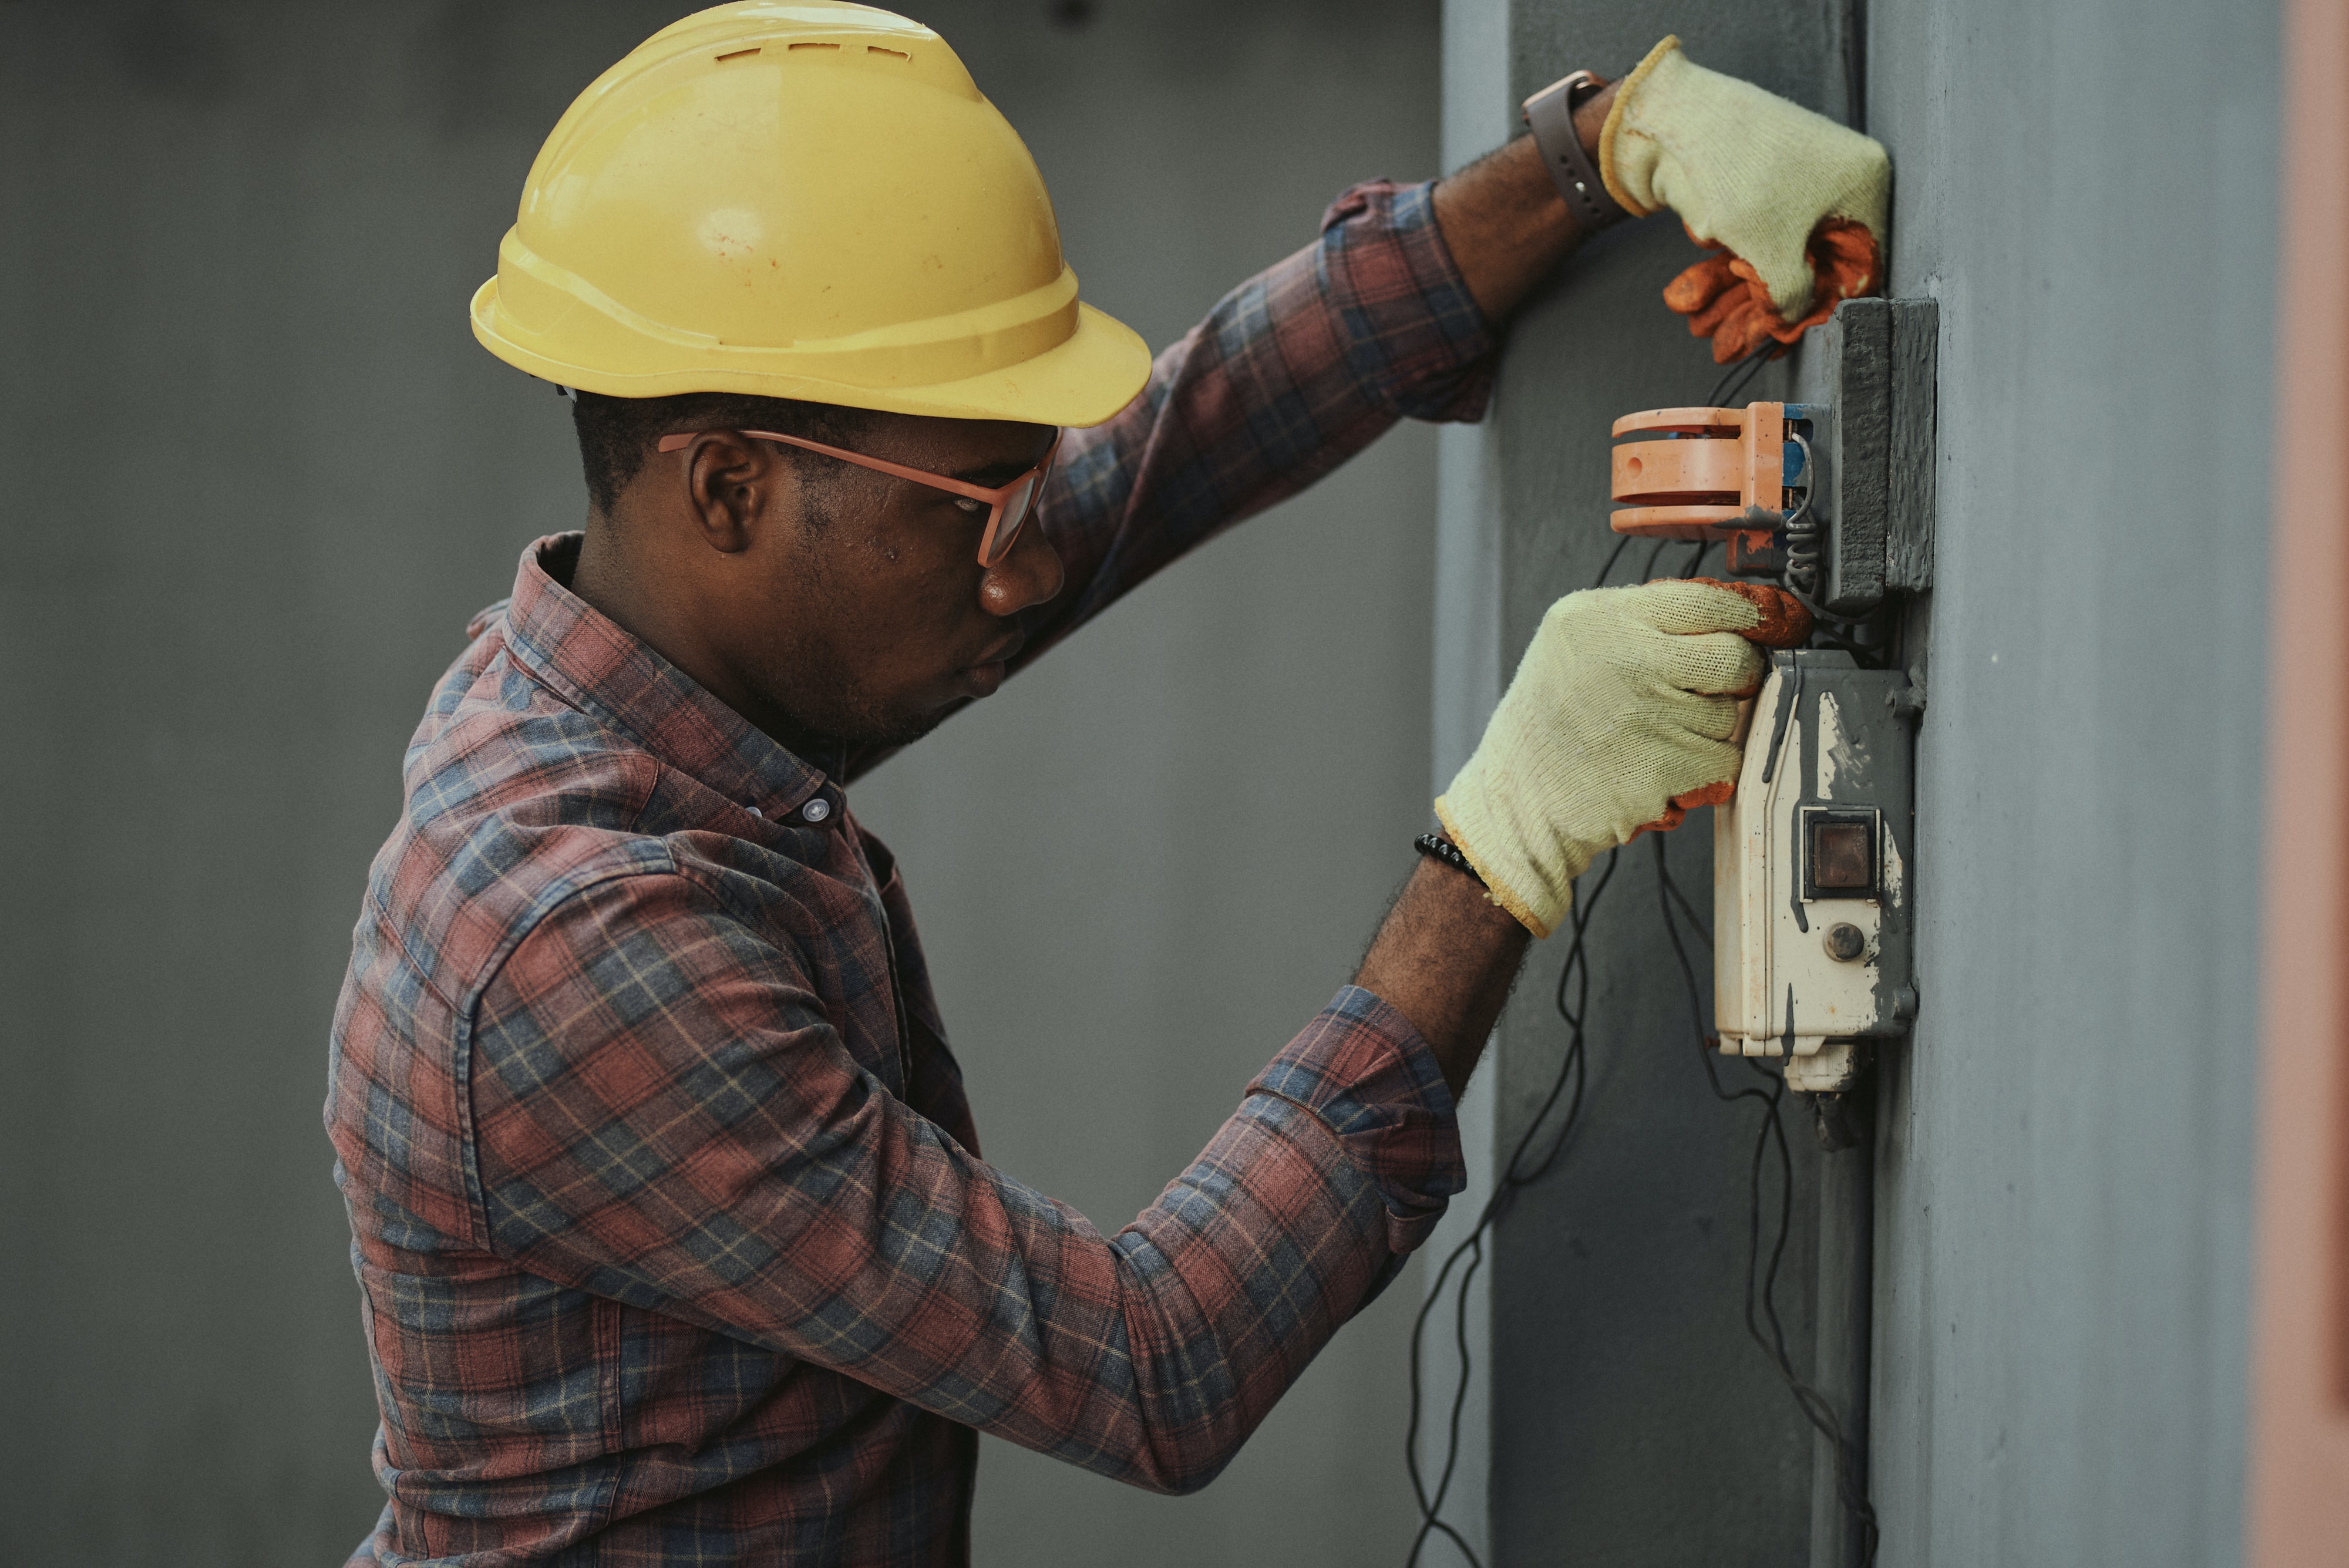 Electrical Services Auckland